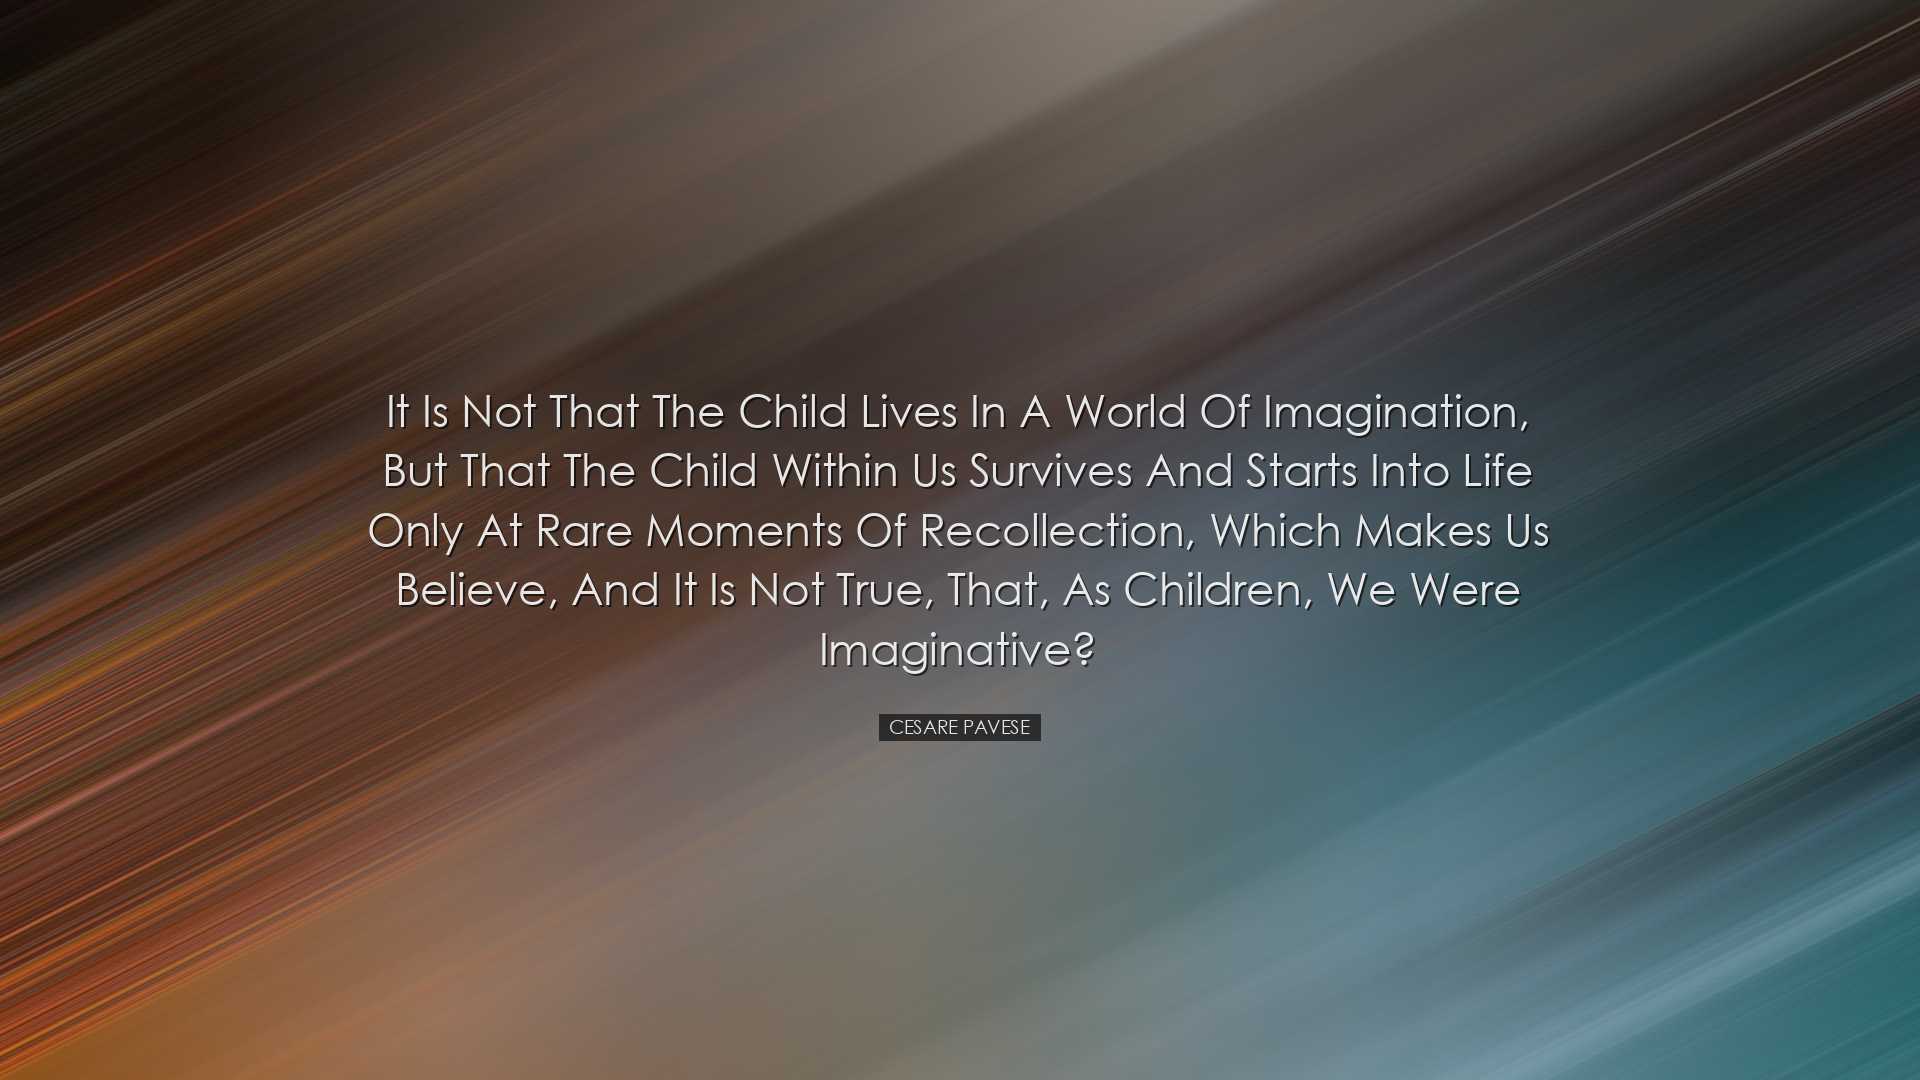 It is not that the child lives in a world of imagination, but that